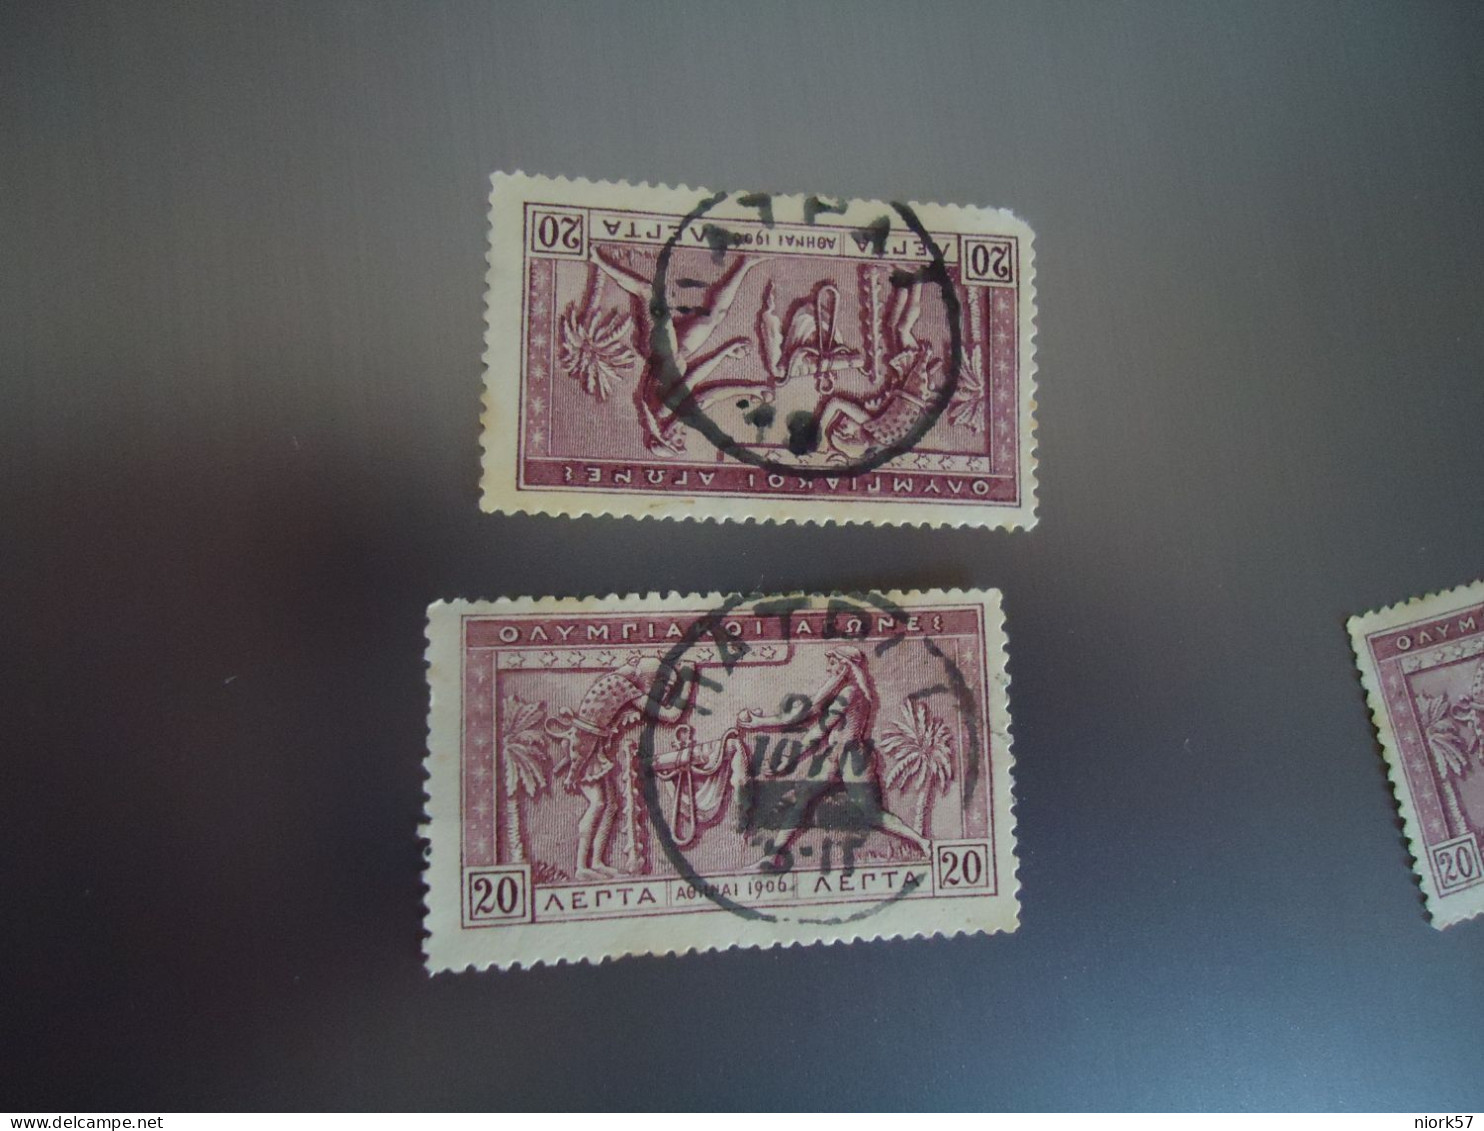 GREECE USED STAMPS  2 OLYMPIC GAMES POSTMARK  PATRAI  ΠΑΤΡΑ - Poststempel - Freistempel